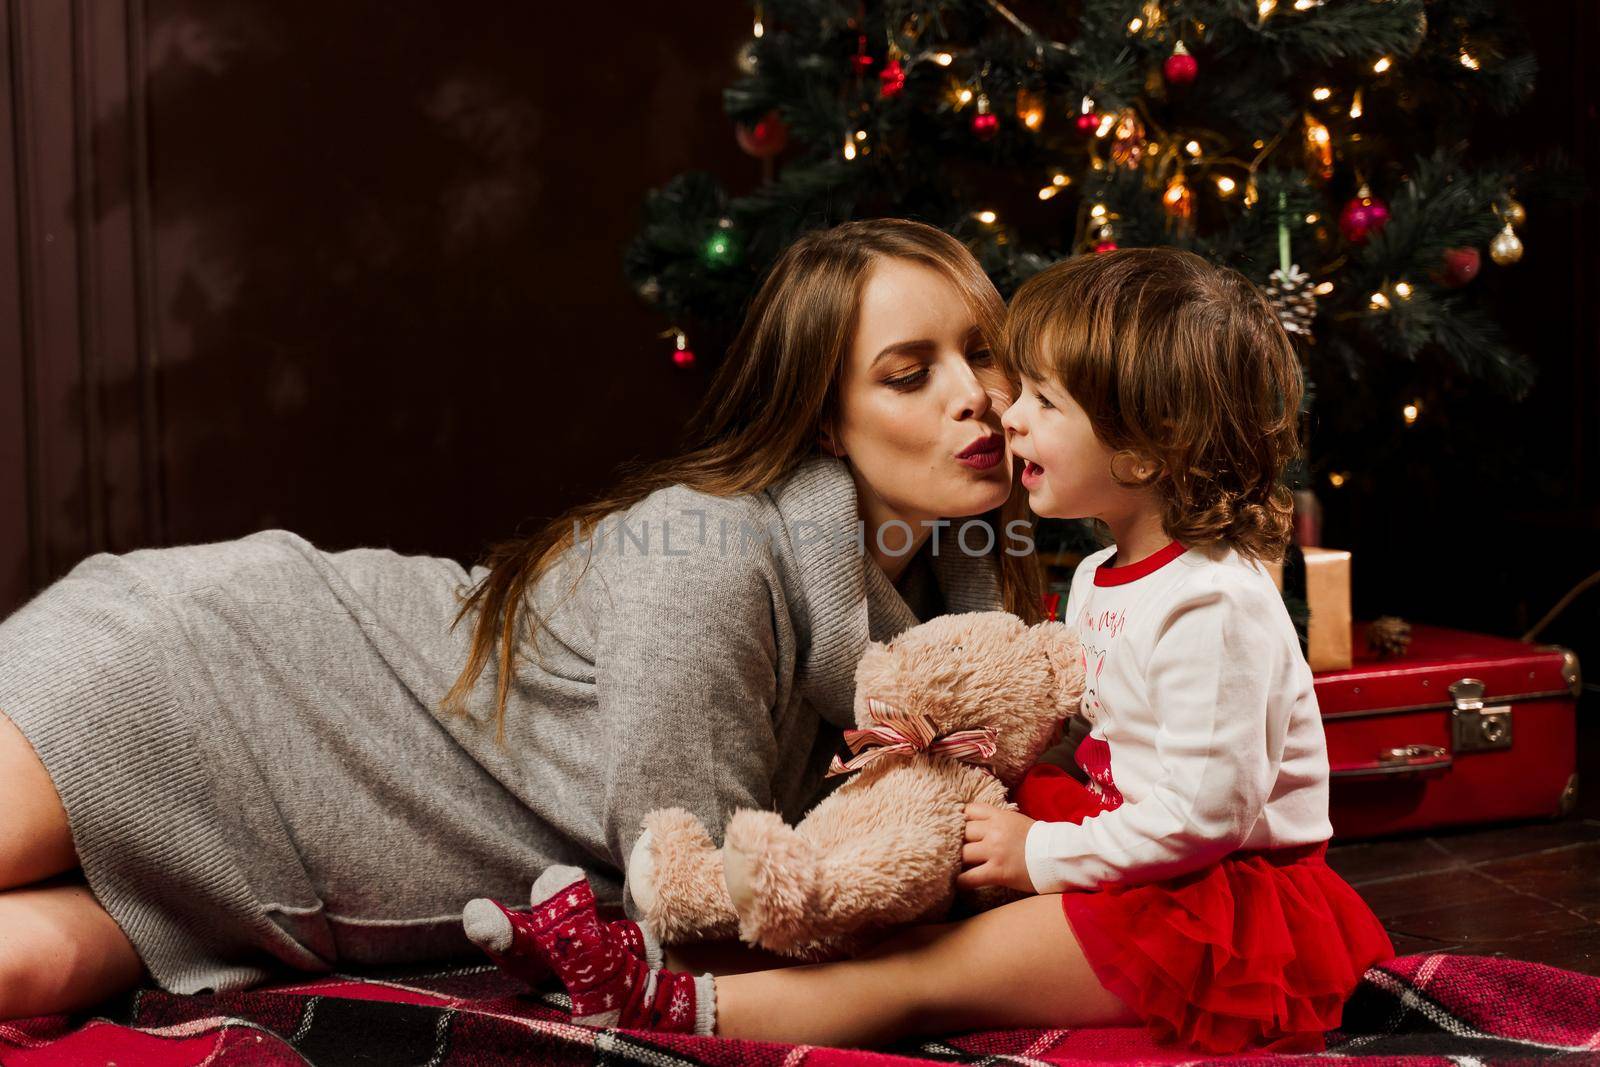 Mother and daughter preparing for christmas celebration. Having fun with family near new year tree. Pregnant woman with daughter